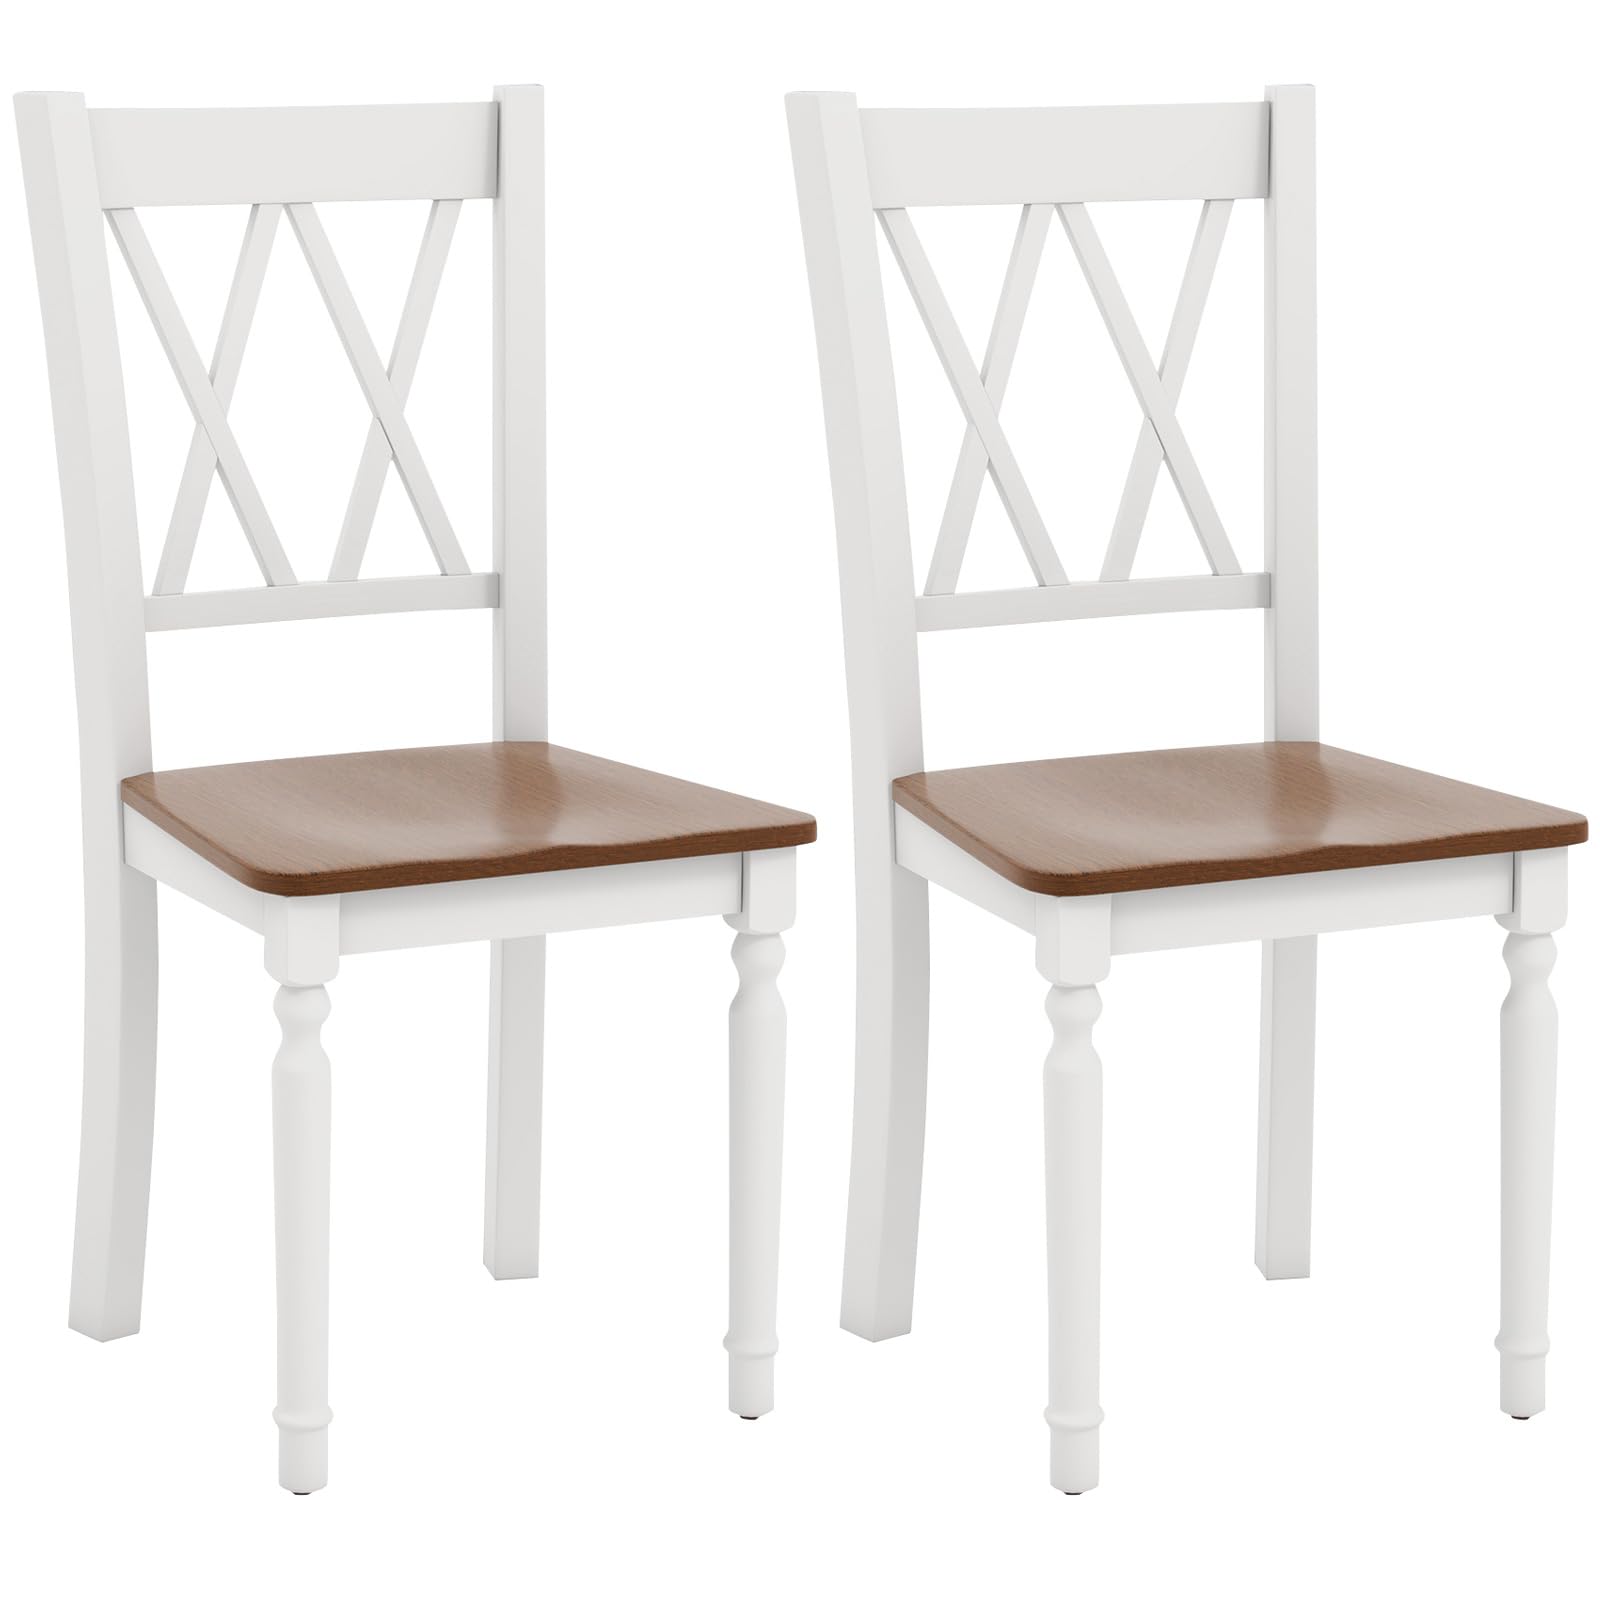 Giantex Dining Room Chairs Set of 2 White, Wooden Farmhouse Kitchen Chairs with Rubber Wood Seat